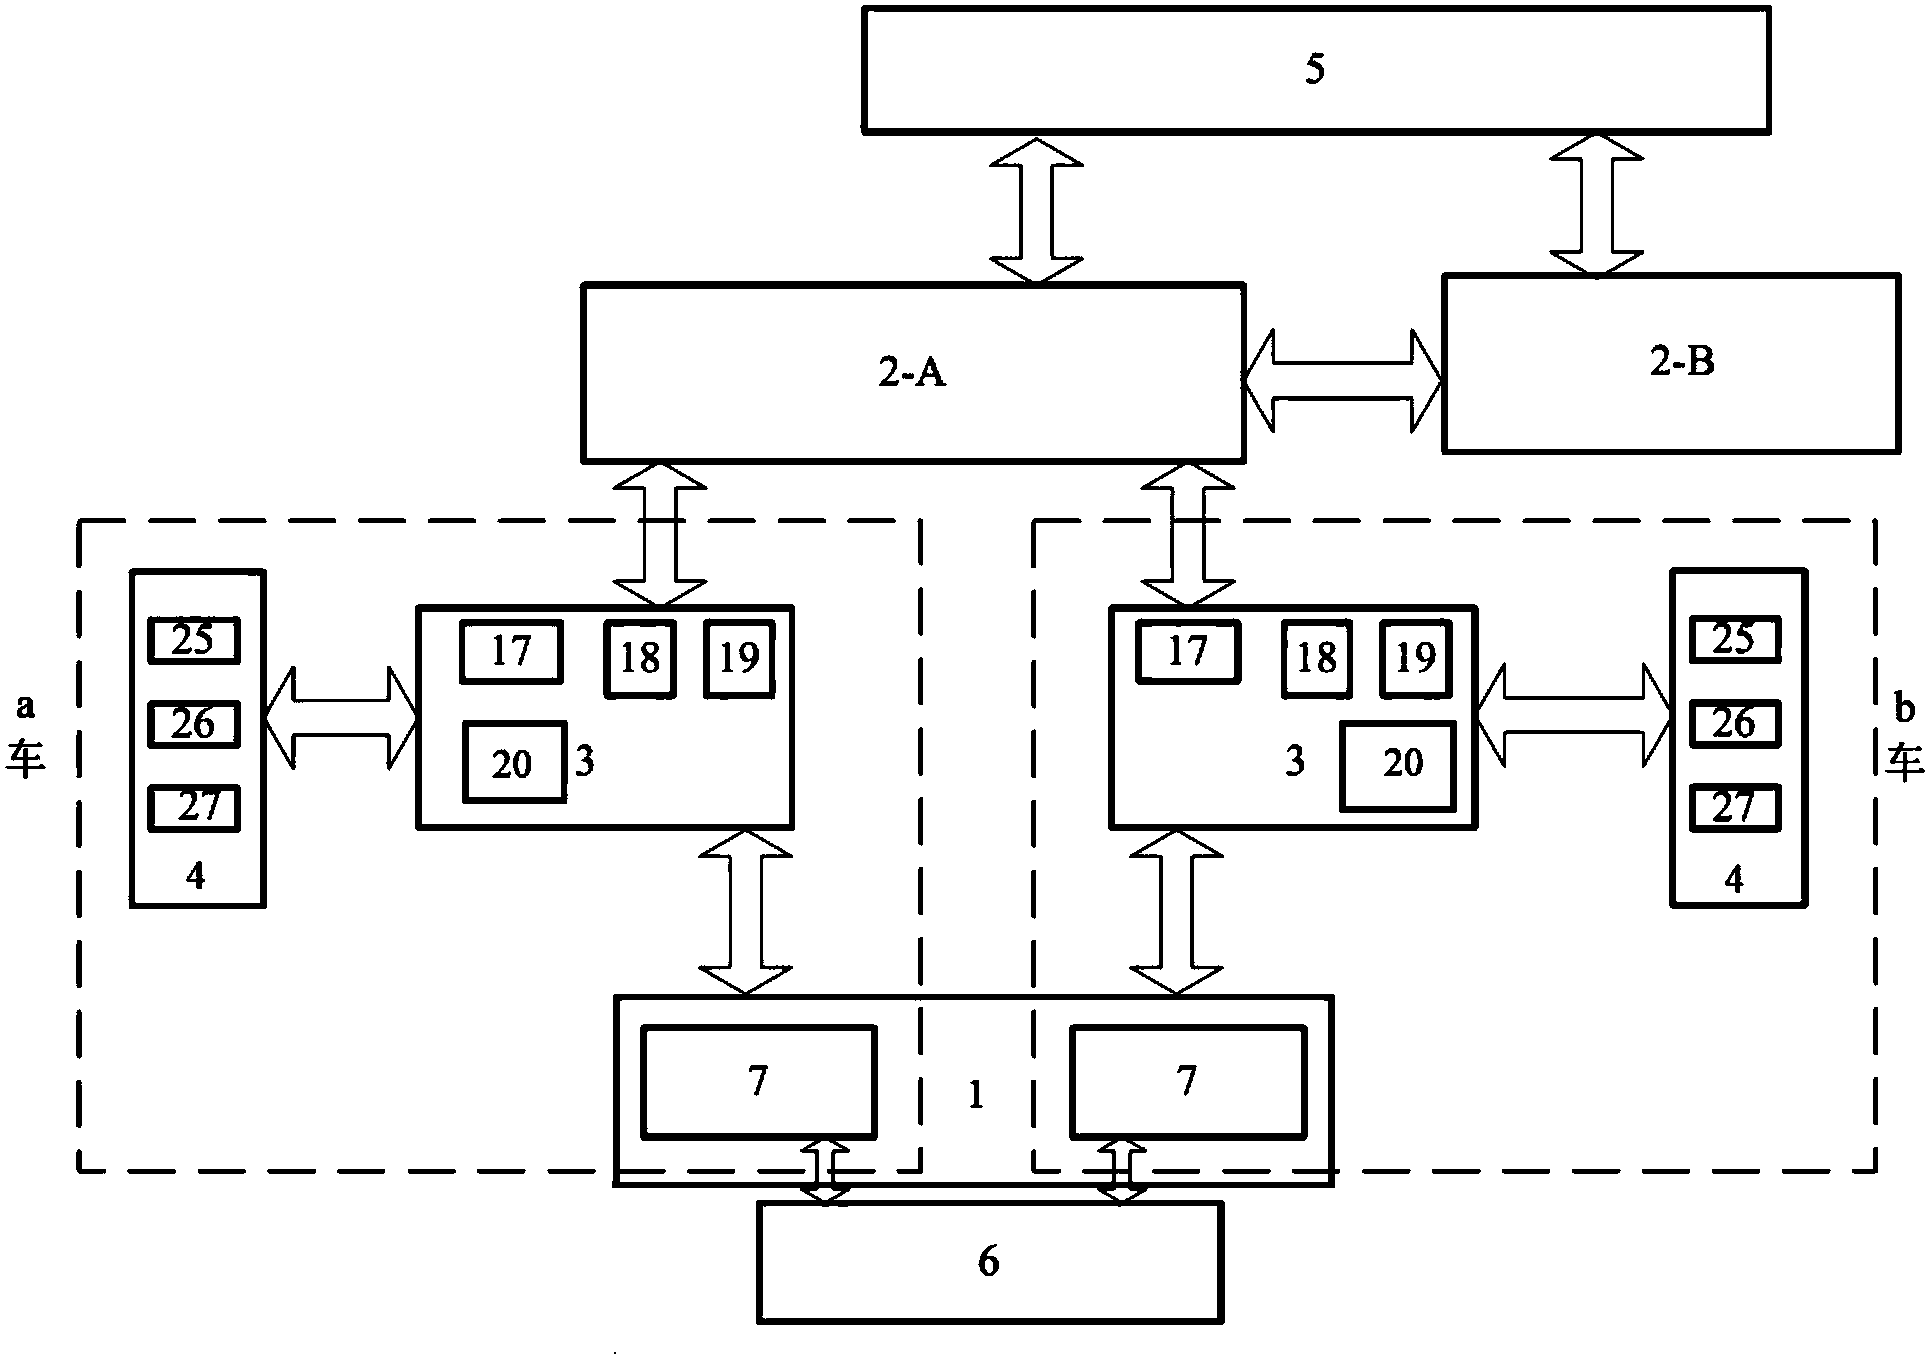 Multi-body interactive type intelligent driving system